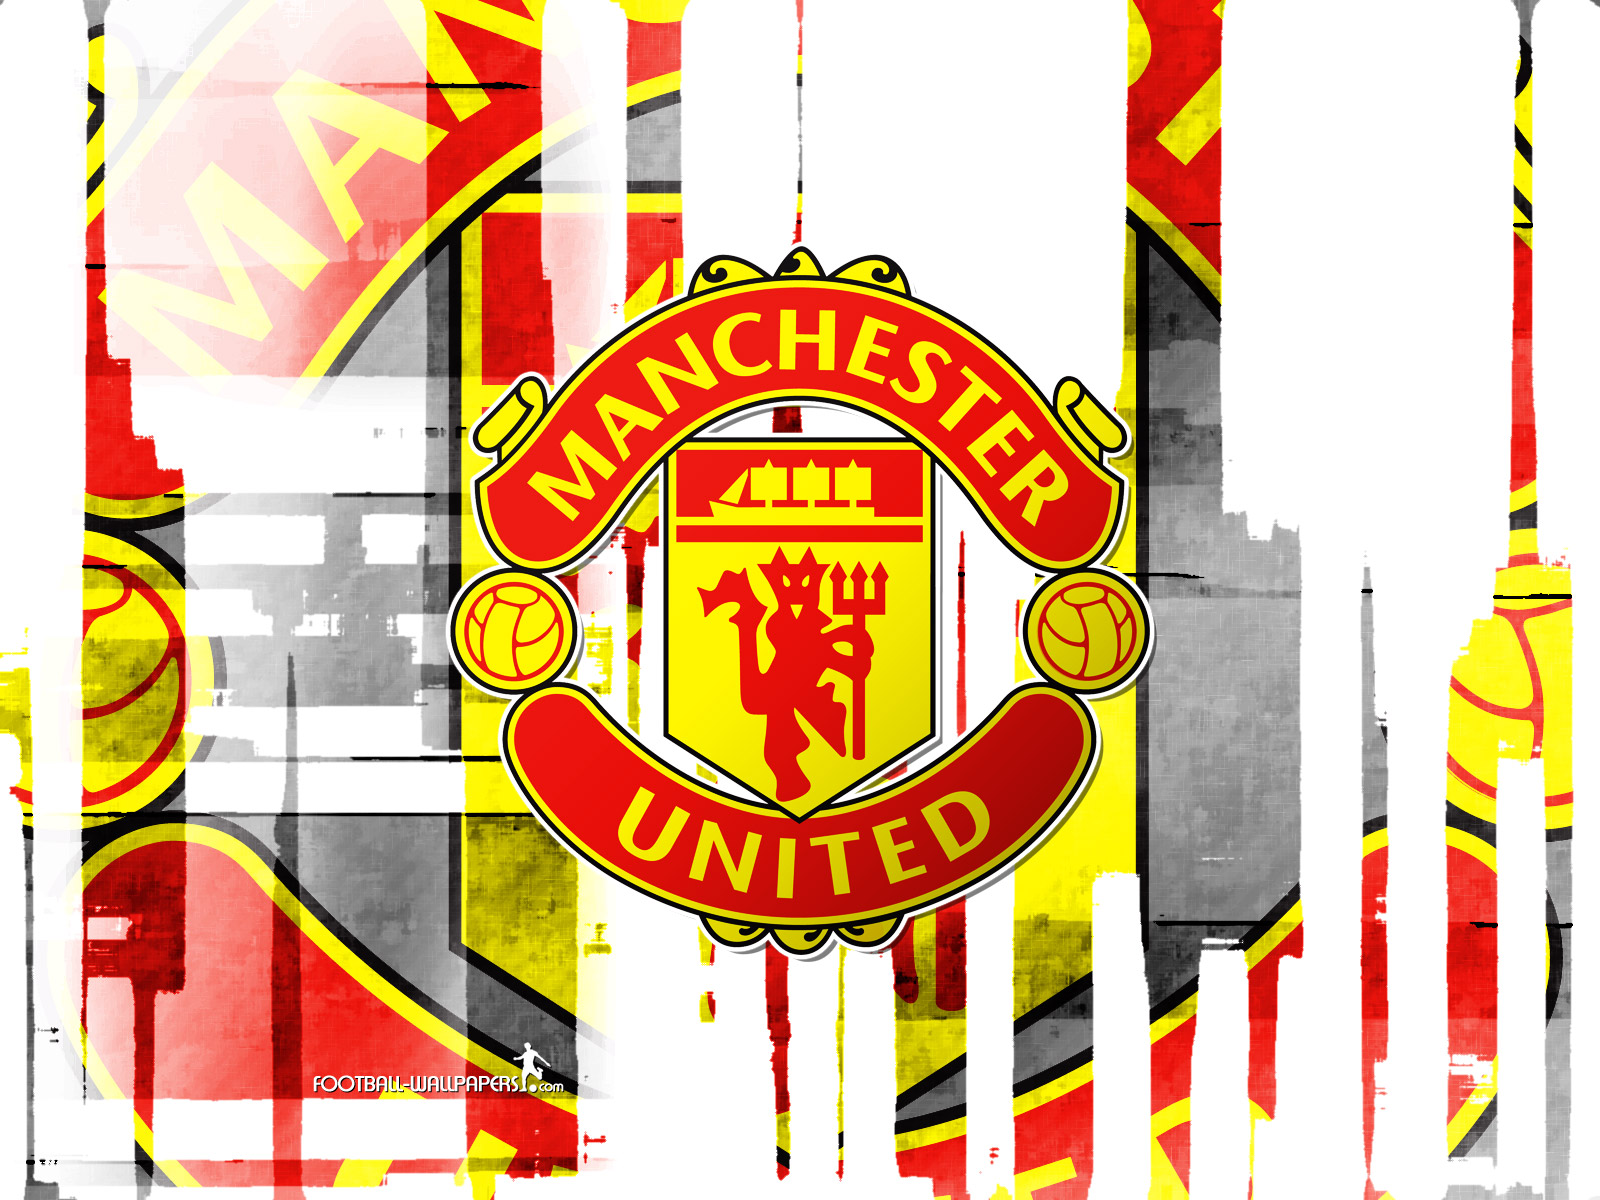 world cup,world cup 2010, South Africa, football, soccer, Manchester_United_wallpaper 2011 